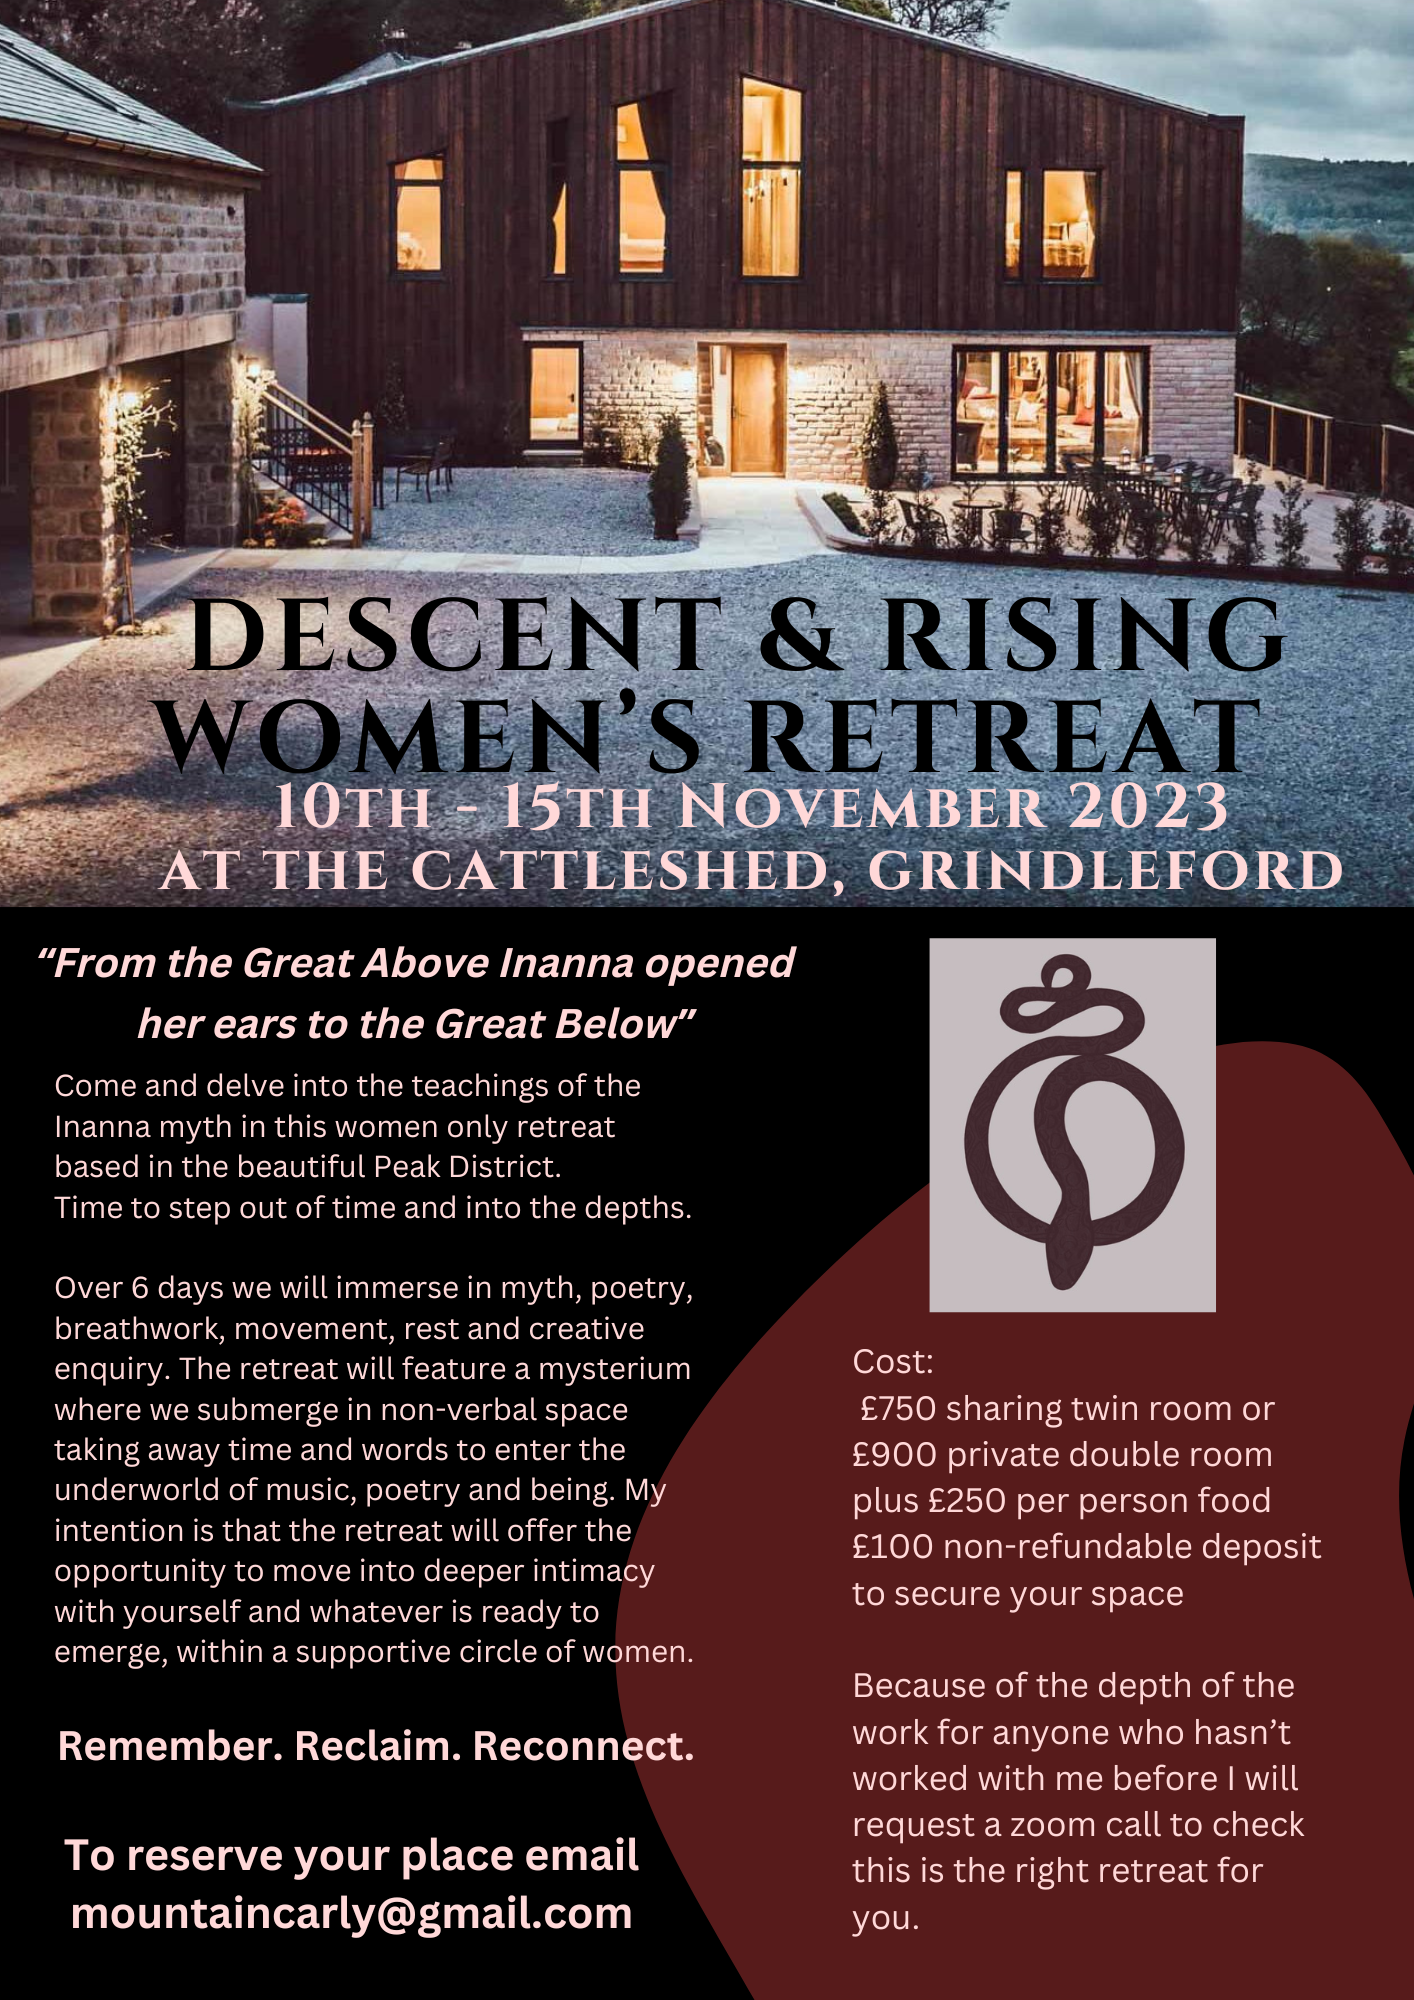 Descent & Rising Retreat at the Cattleshed, UK.